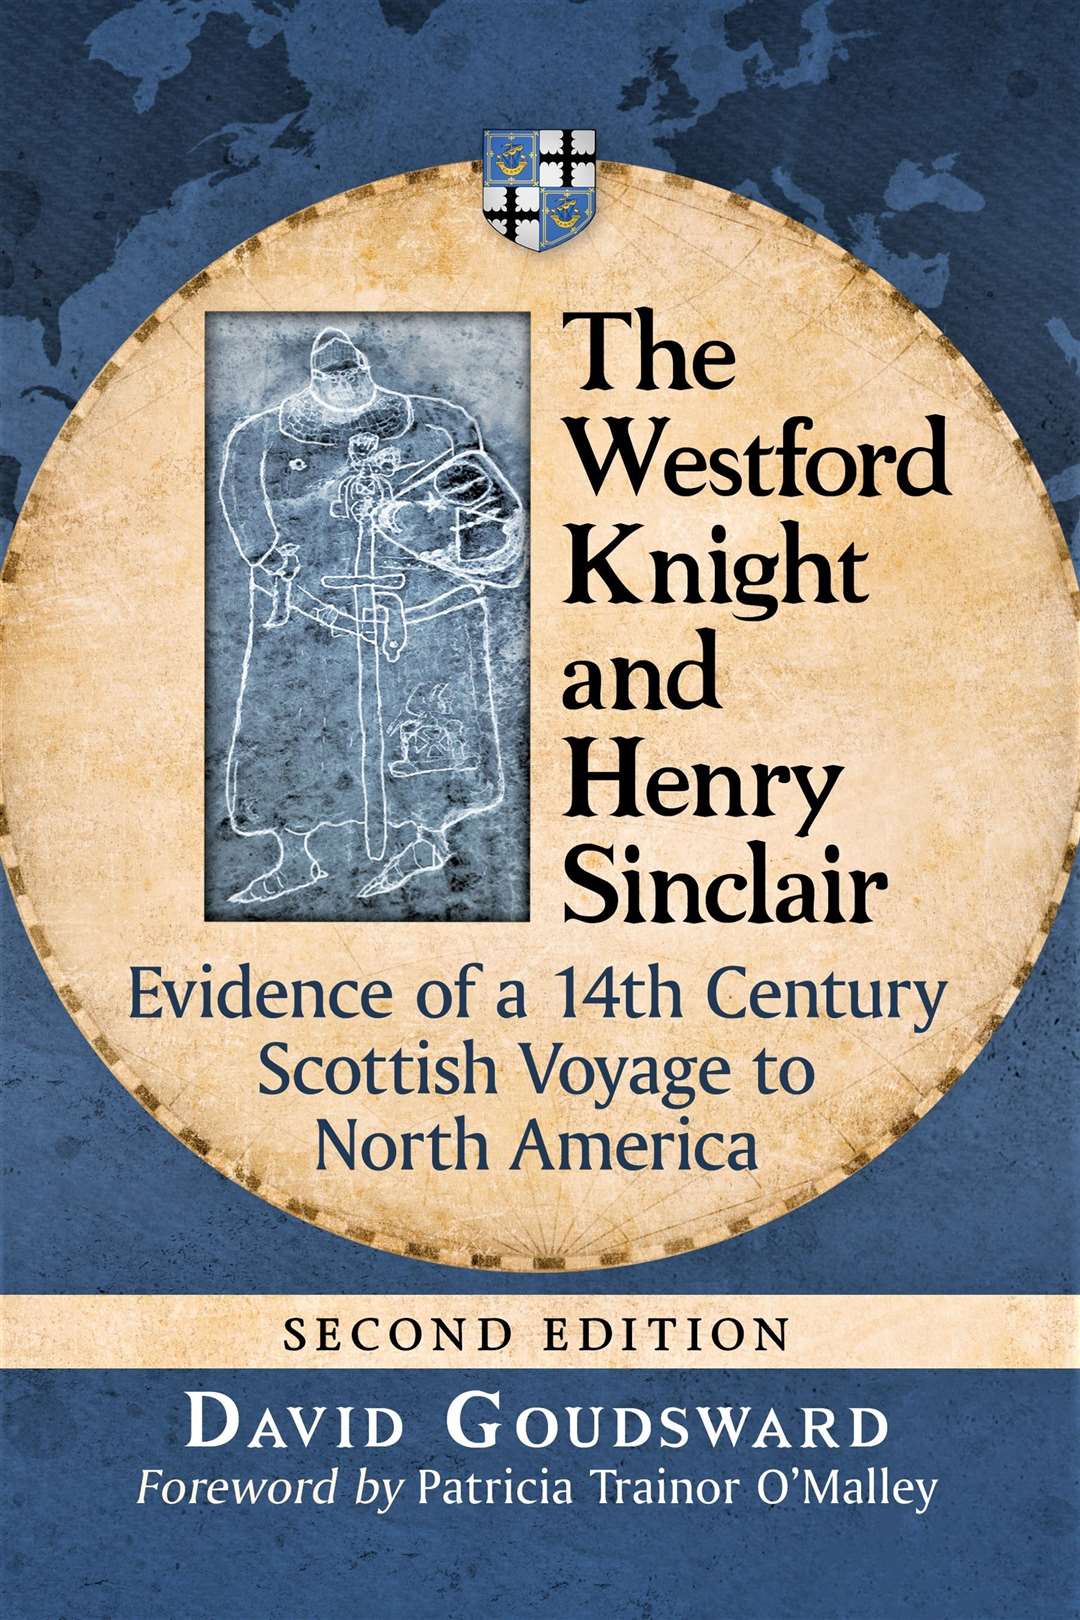 Westord Knight book cover